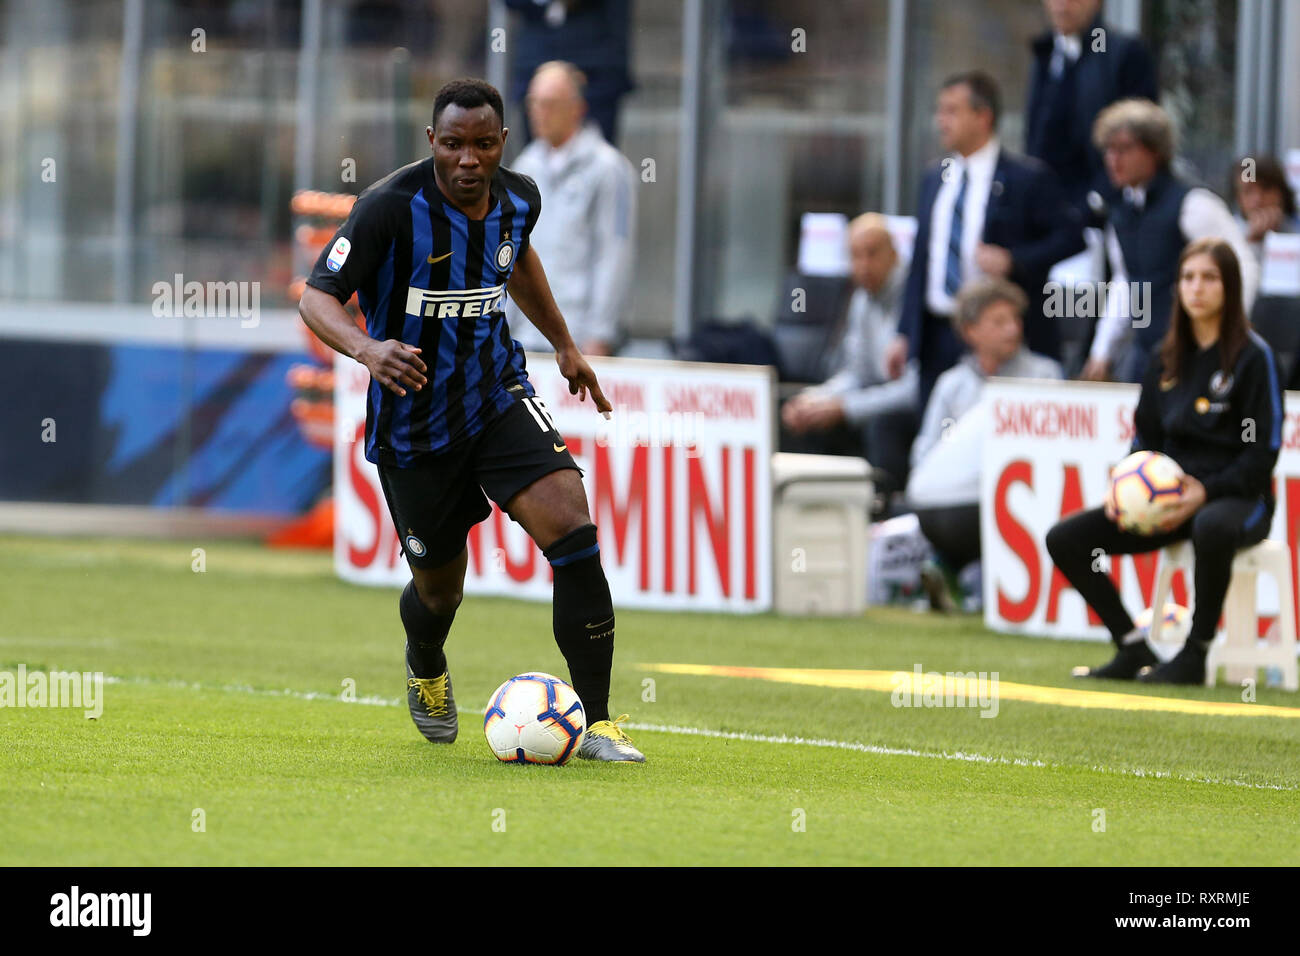 Milano, Italy. 10th March 2019.  Kwadwo Asamoah of FC Internazionale in action during the Serie A match between FC Internazionale and Spal. Credit: Marco Canoniero/Alamy Live News Stock Photo